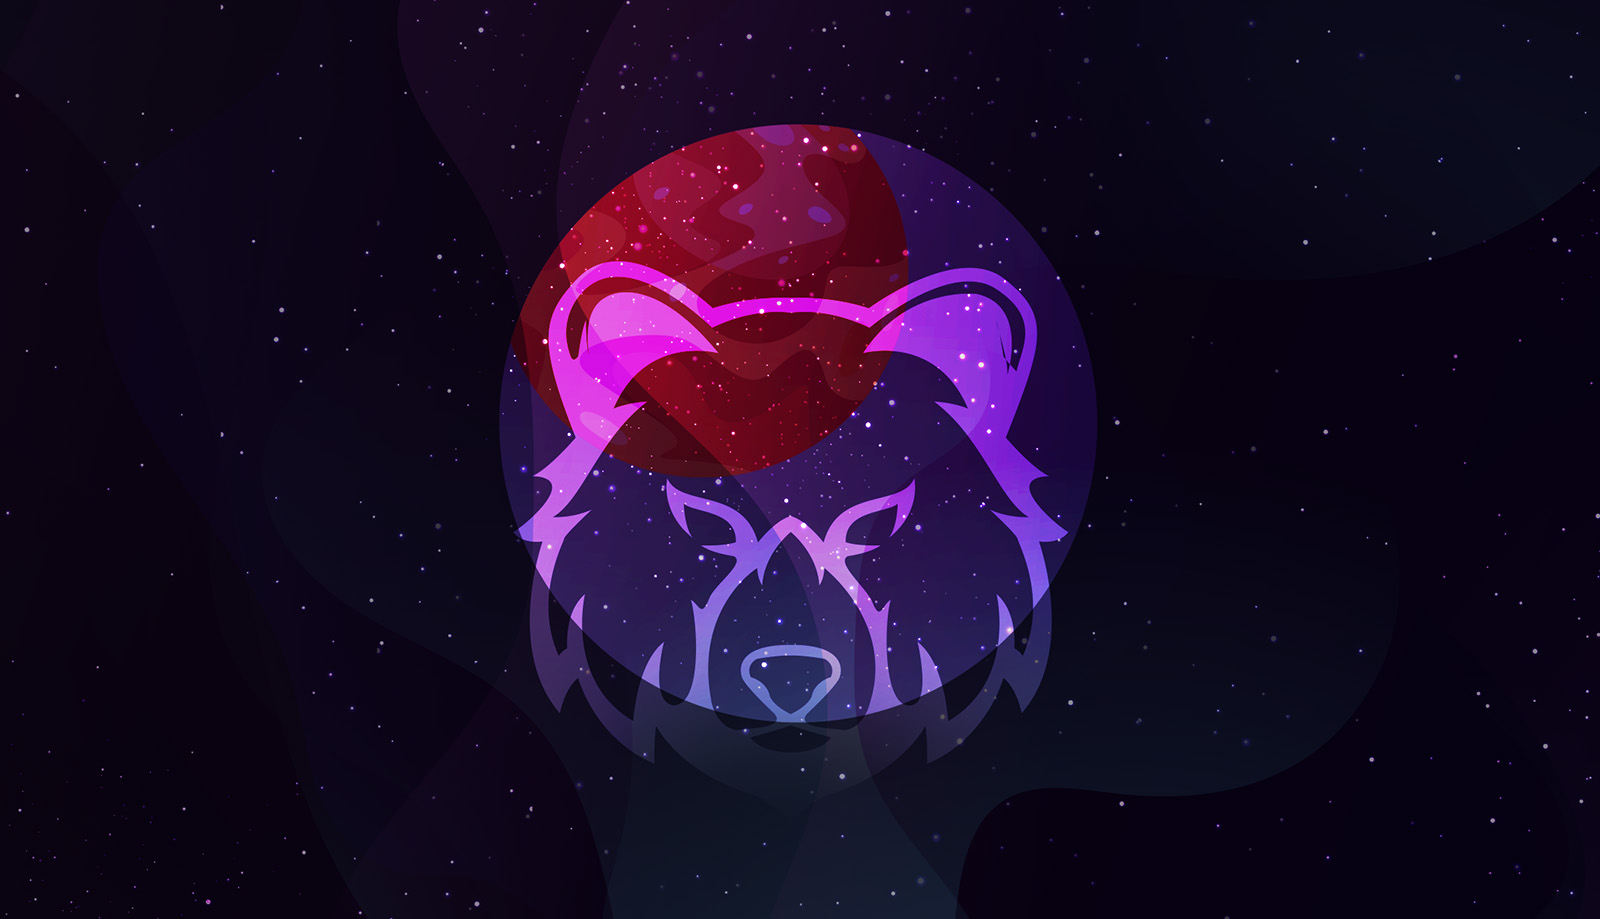 A purple illustrated bear against a night sky with stars. Its head is inset in a red circle. The constellation ursa.